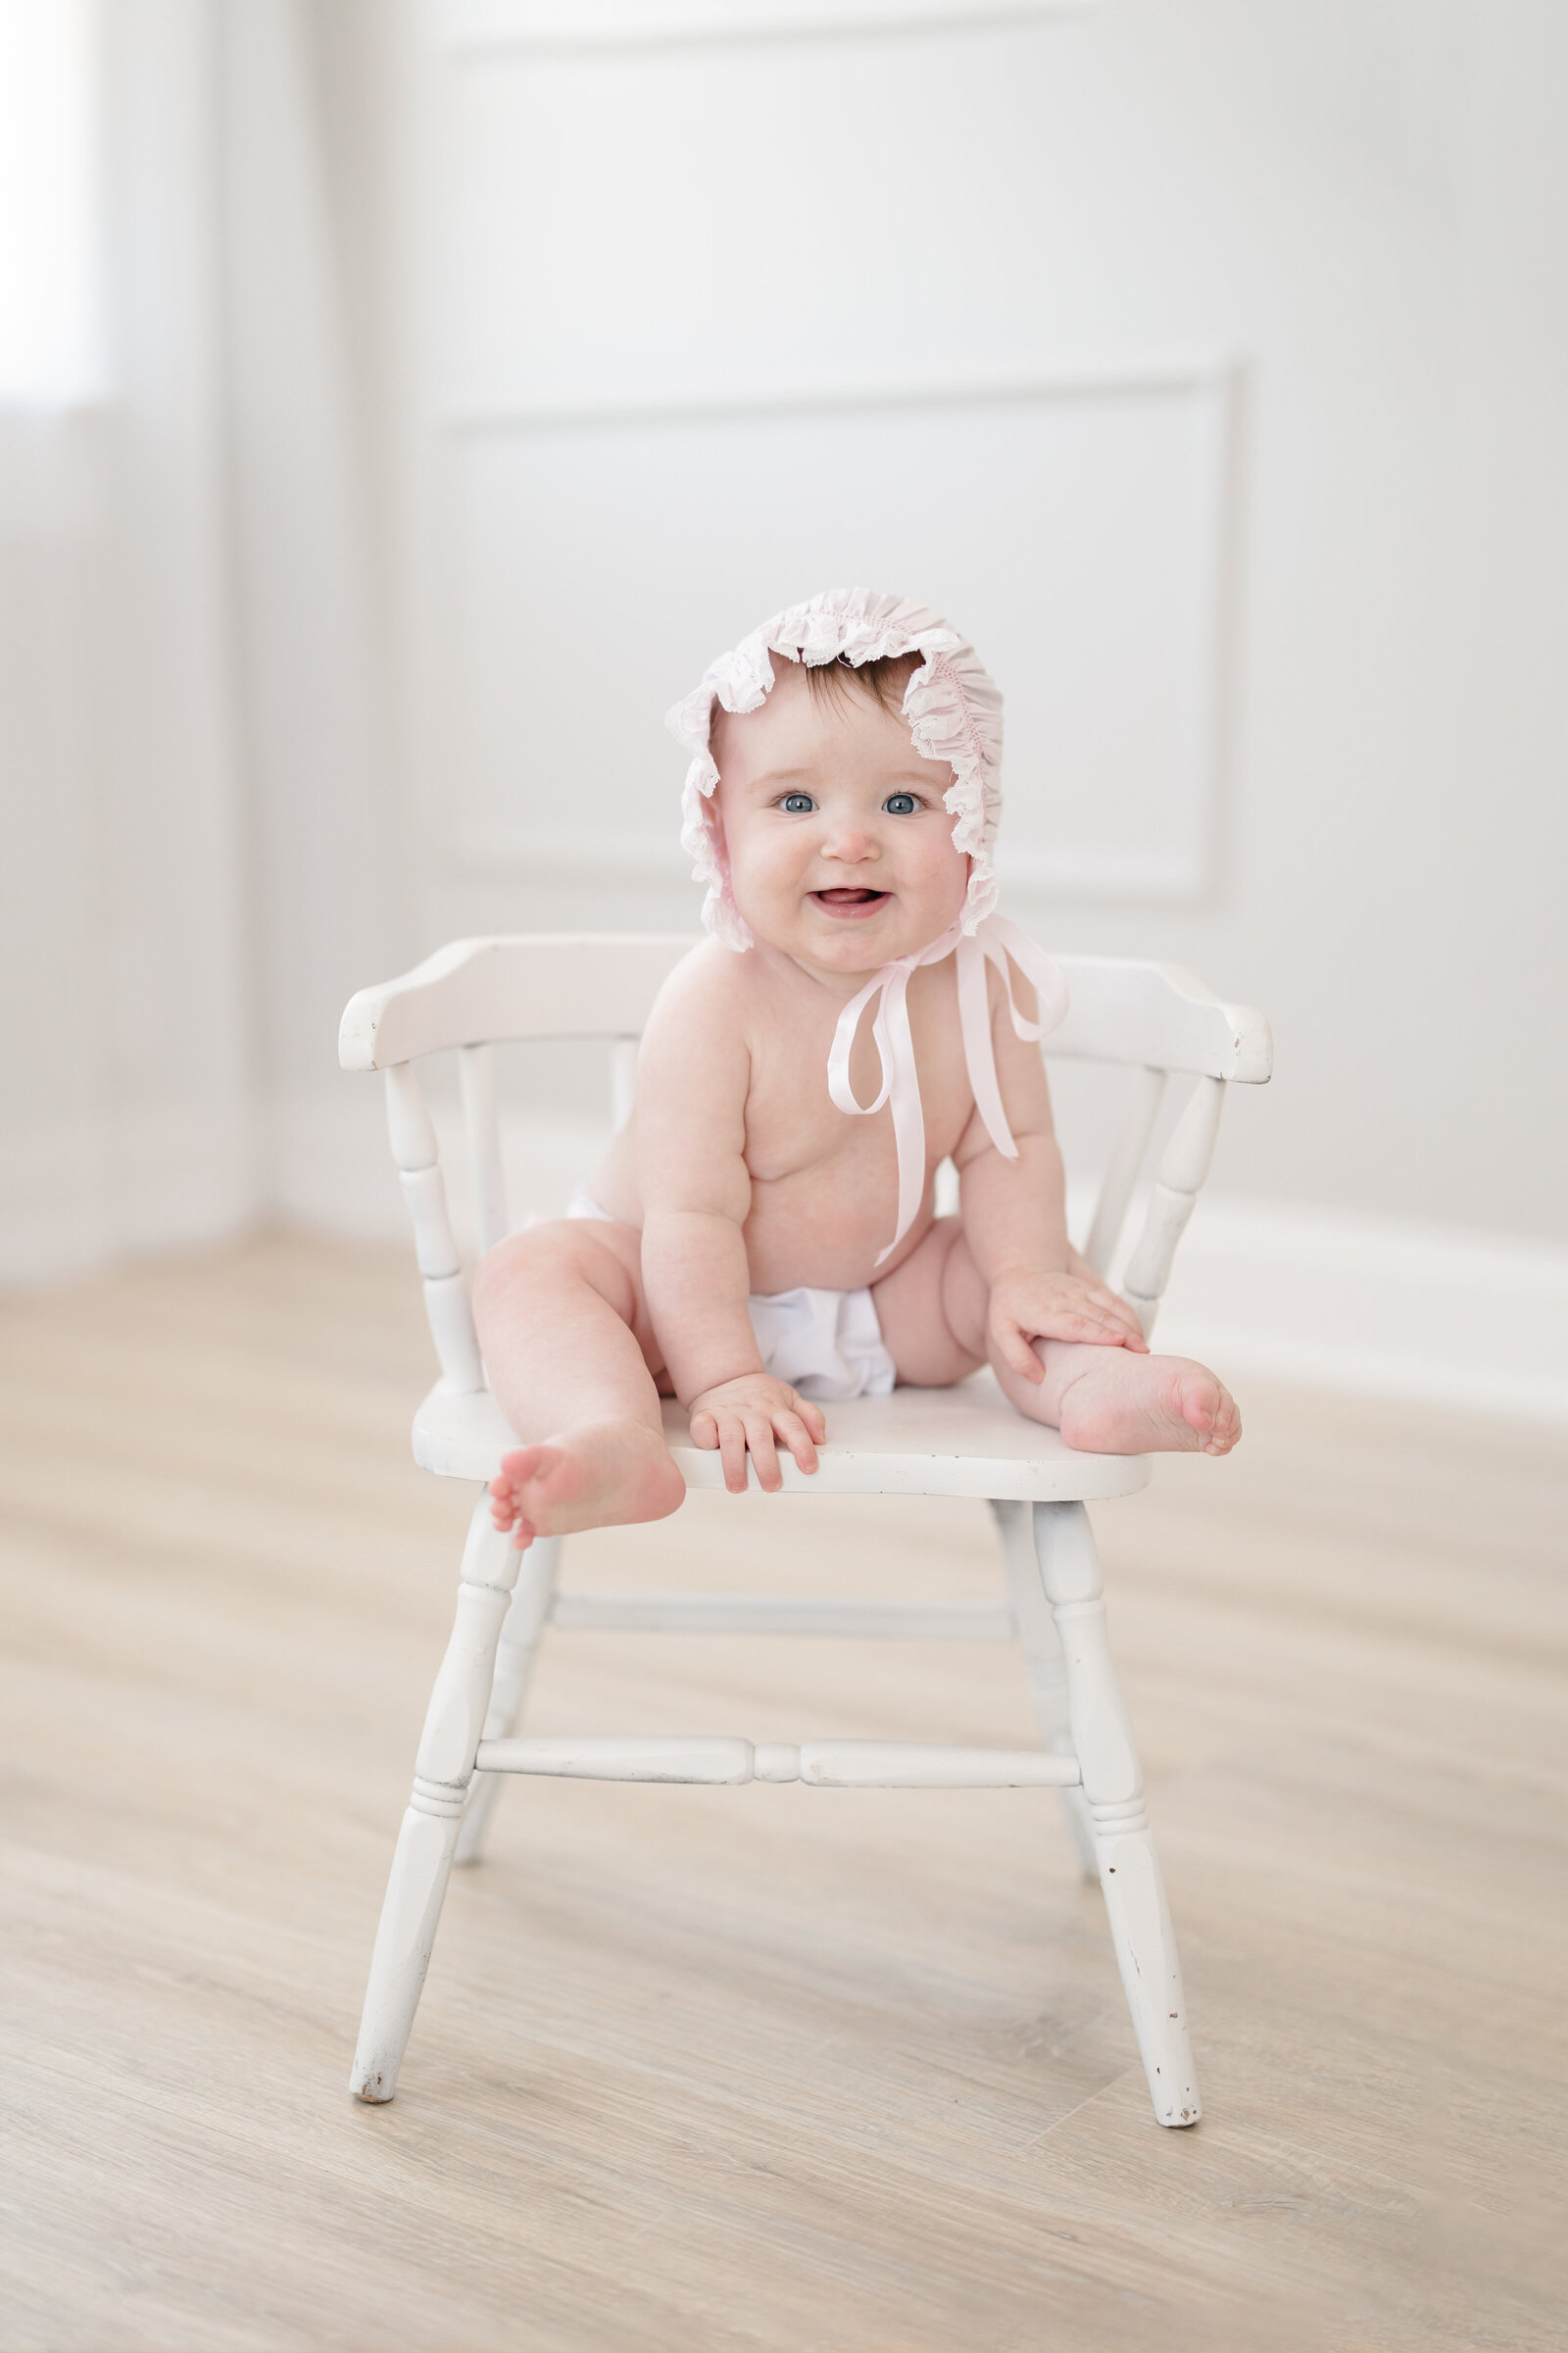 Baby girl wearing a bonnet and diaper cover while sitting on a white chair and smiling